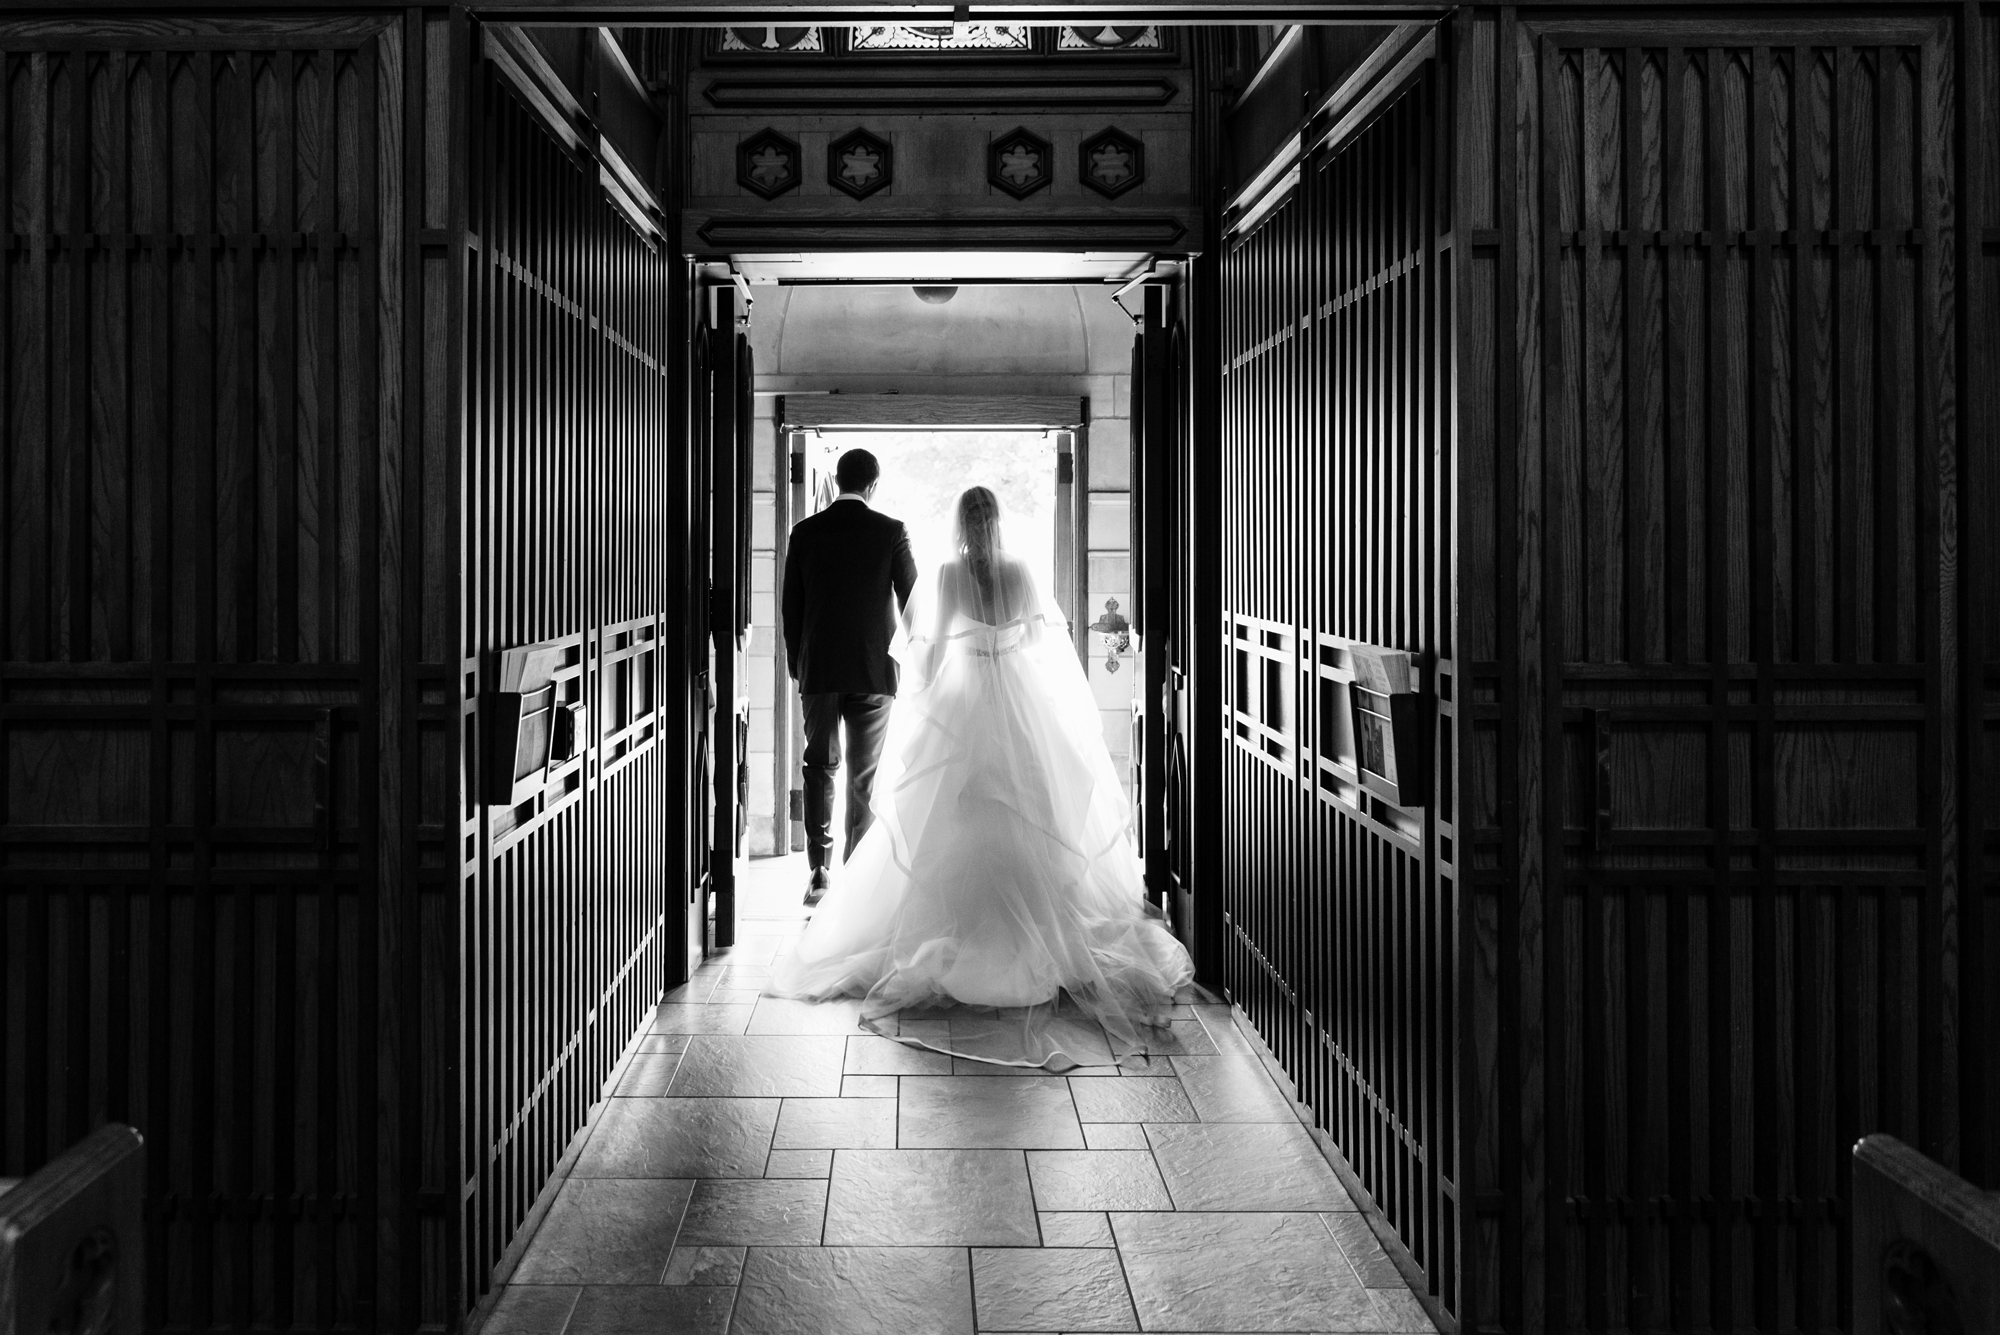 Bride & Groom leaving their wedding ceremony out the God Country Door at the Basilica of the Sacred Heart on the campus of the University of Notre Dame